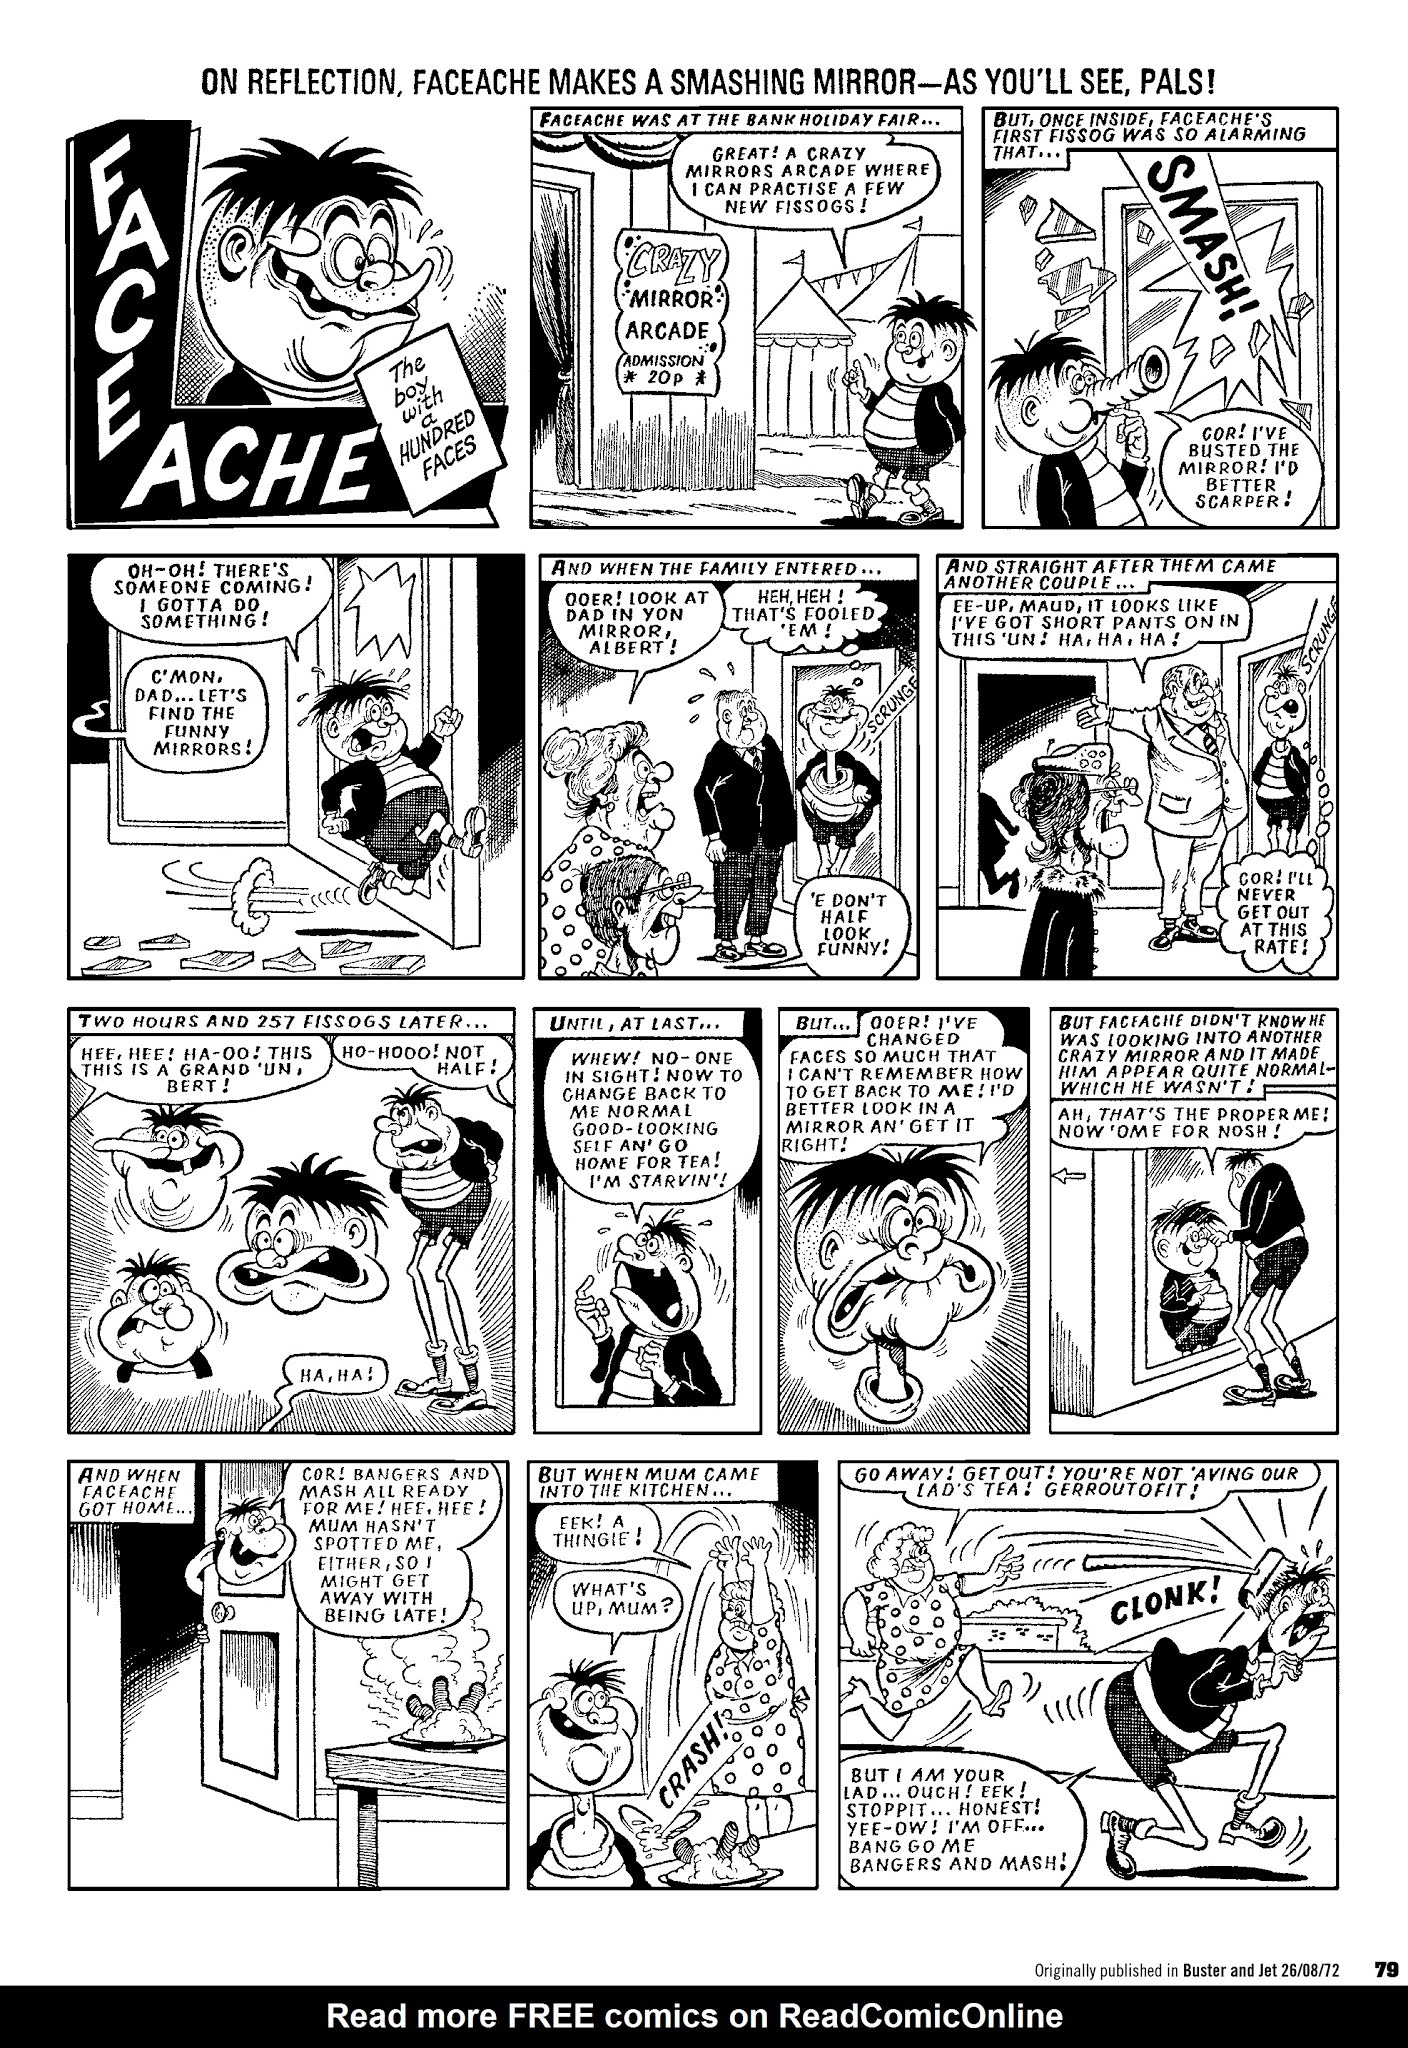 Read online Faceache: The First Hundred Scrunges comic -  Issue # TPB 1 - 81